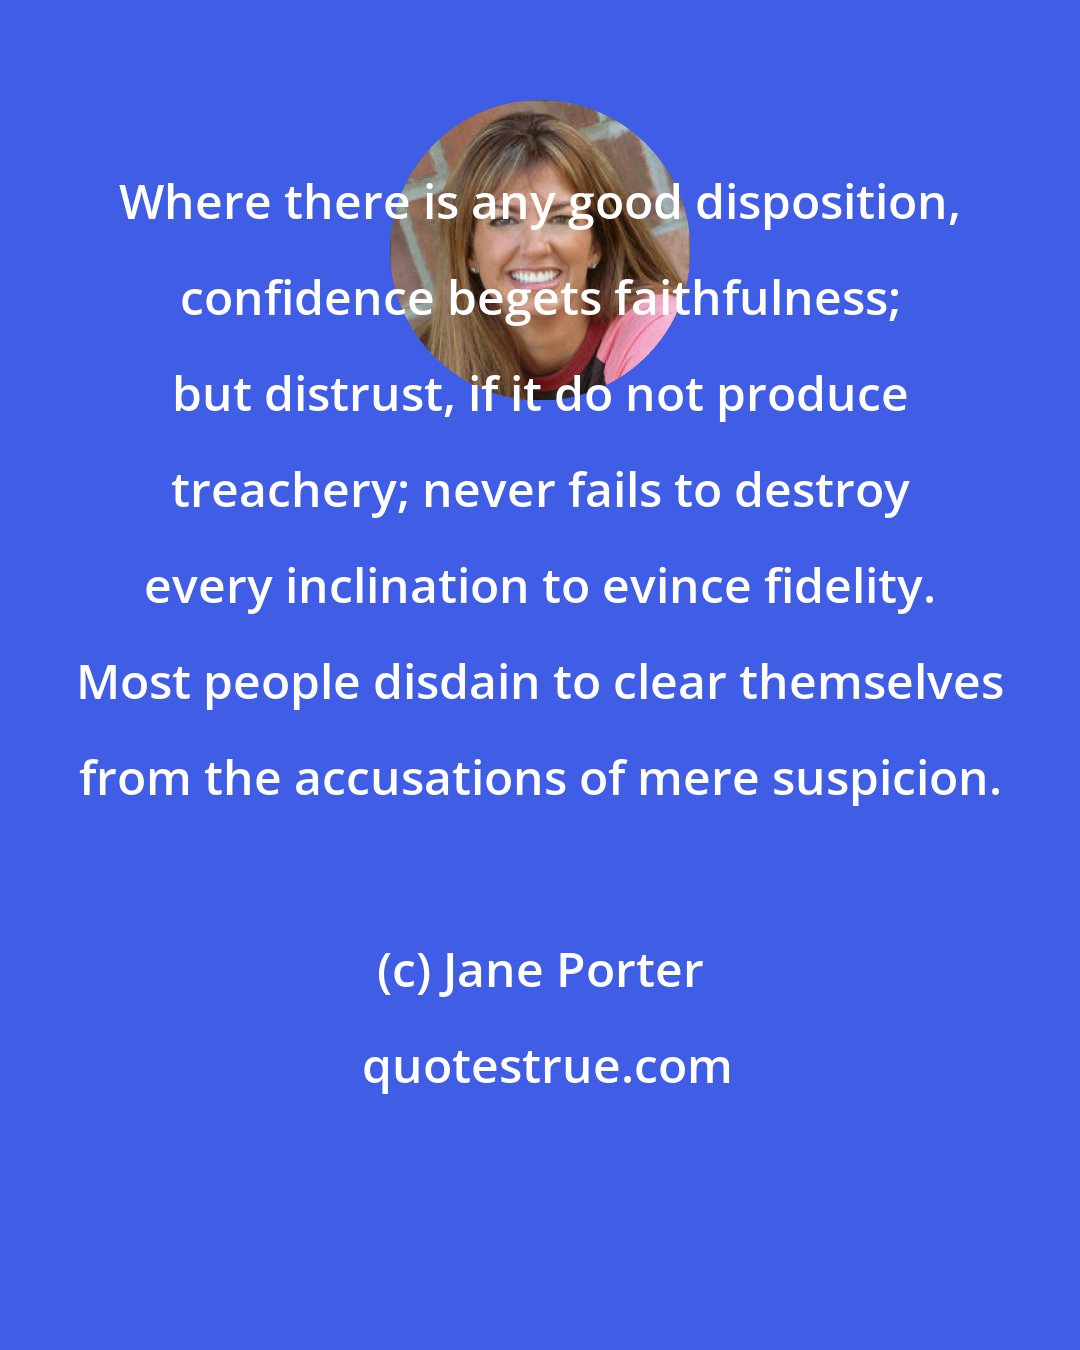 Jane Porter: Where there is any good disposition, confidence begets faithfulness; but distrust, if it do not produce treachery; never fails to destroy every inclination to evince fidelity. Most people disdain to clear themselves from the accusations of mere suspicion.